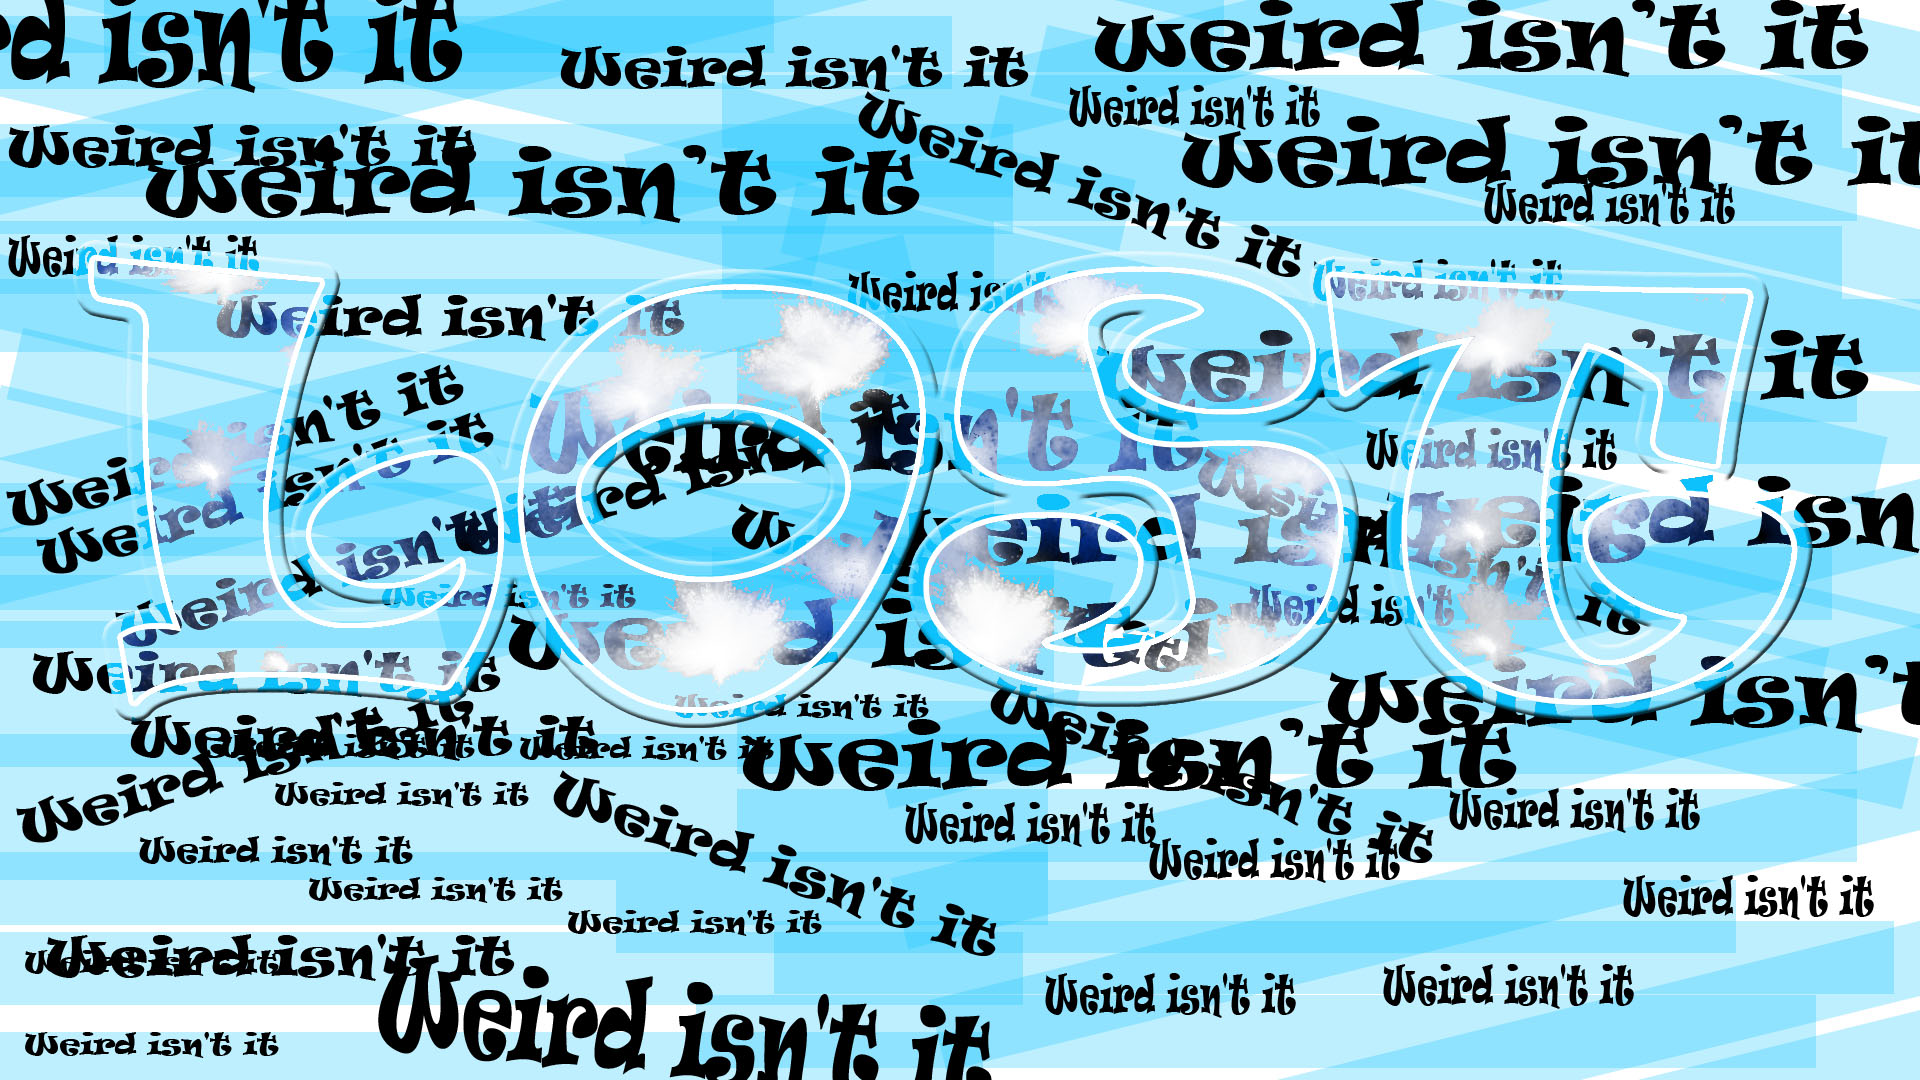 misc, word, blue, colors, lost (tv show), weird, white